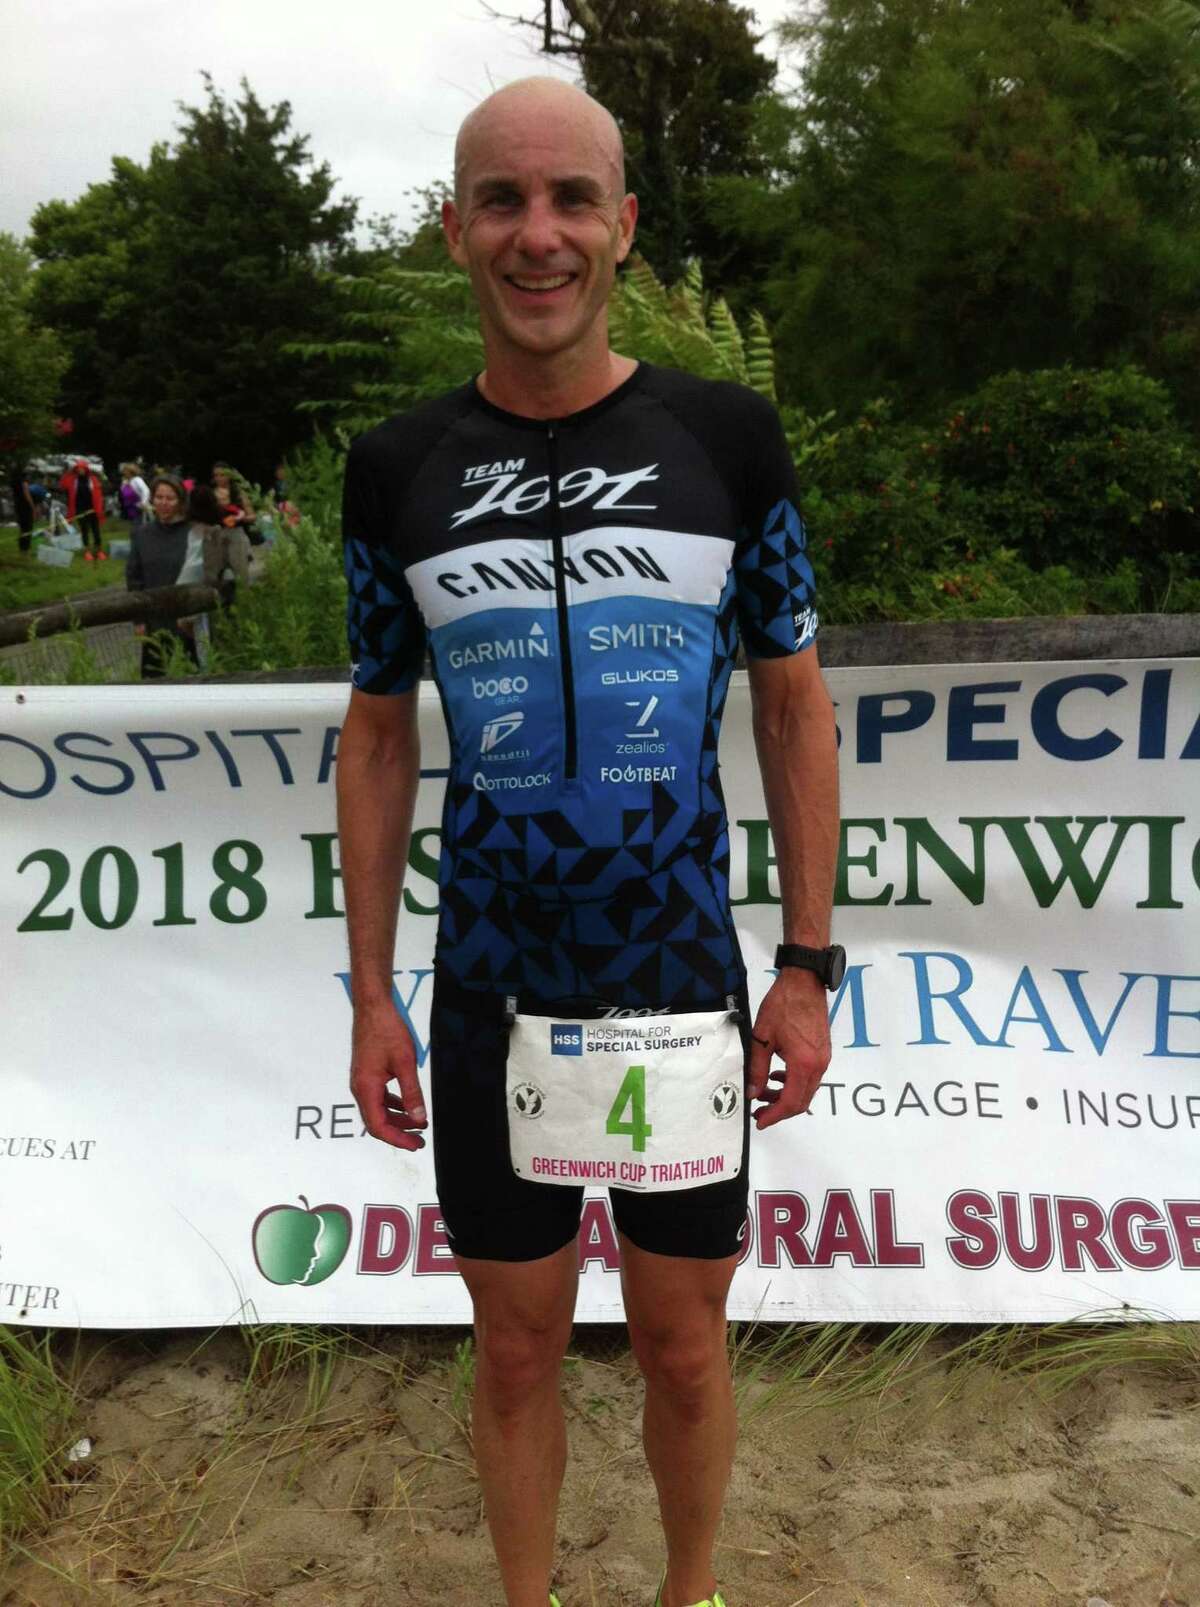 Gus Ellison of Rowayton won the Hospital for Special Surgery Greenwich Cup Triathlon Sunday at Greenwich Point.